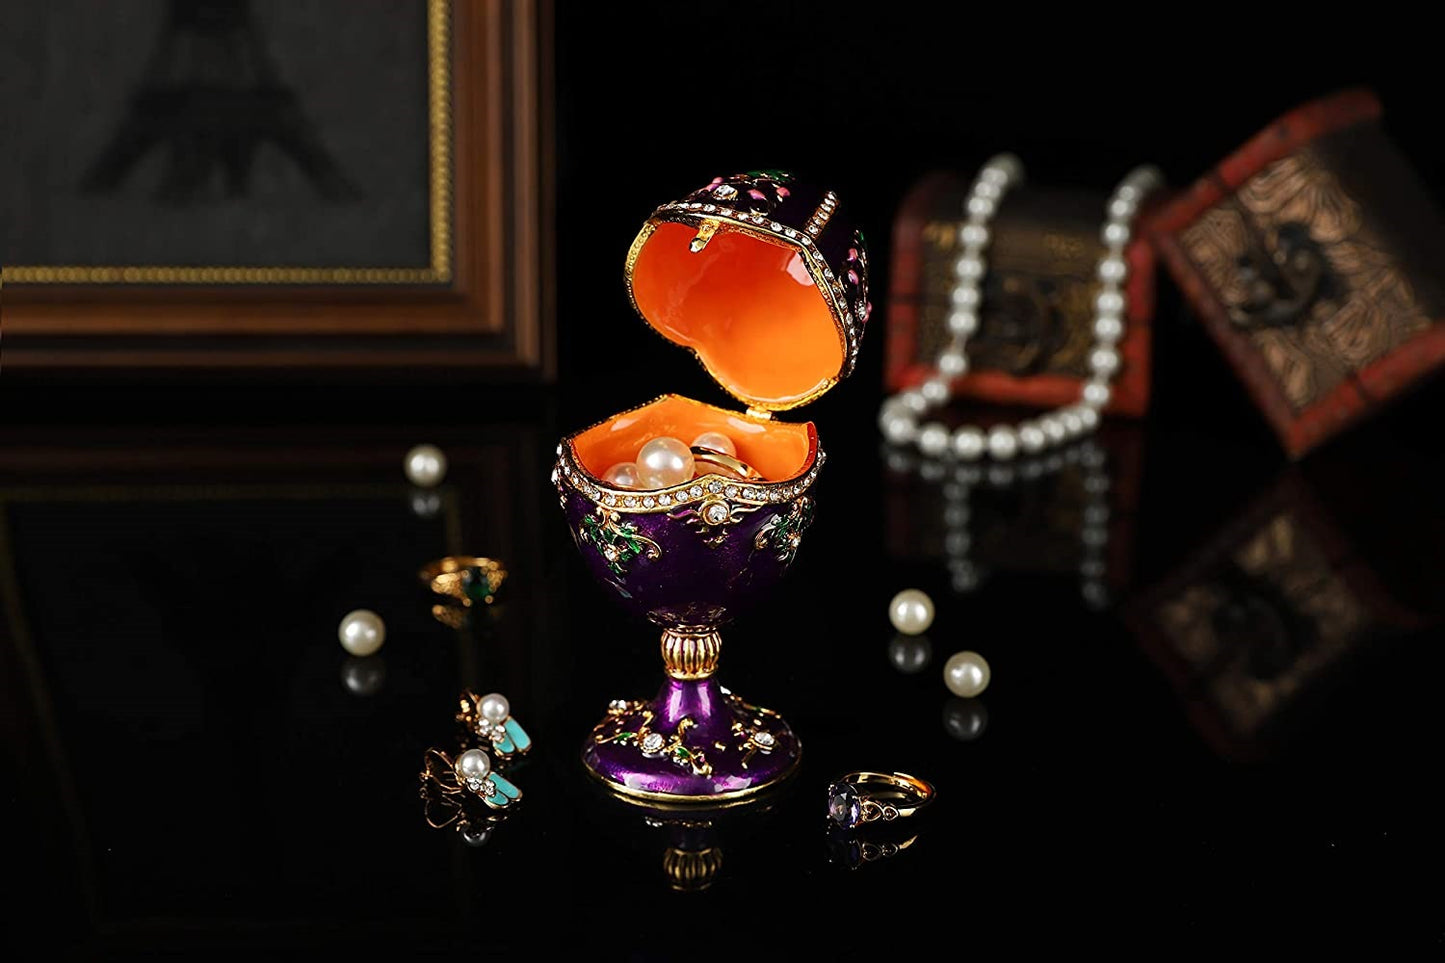 Faberge Eggs Exquisite Imitations Pushkin Collection #2